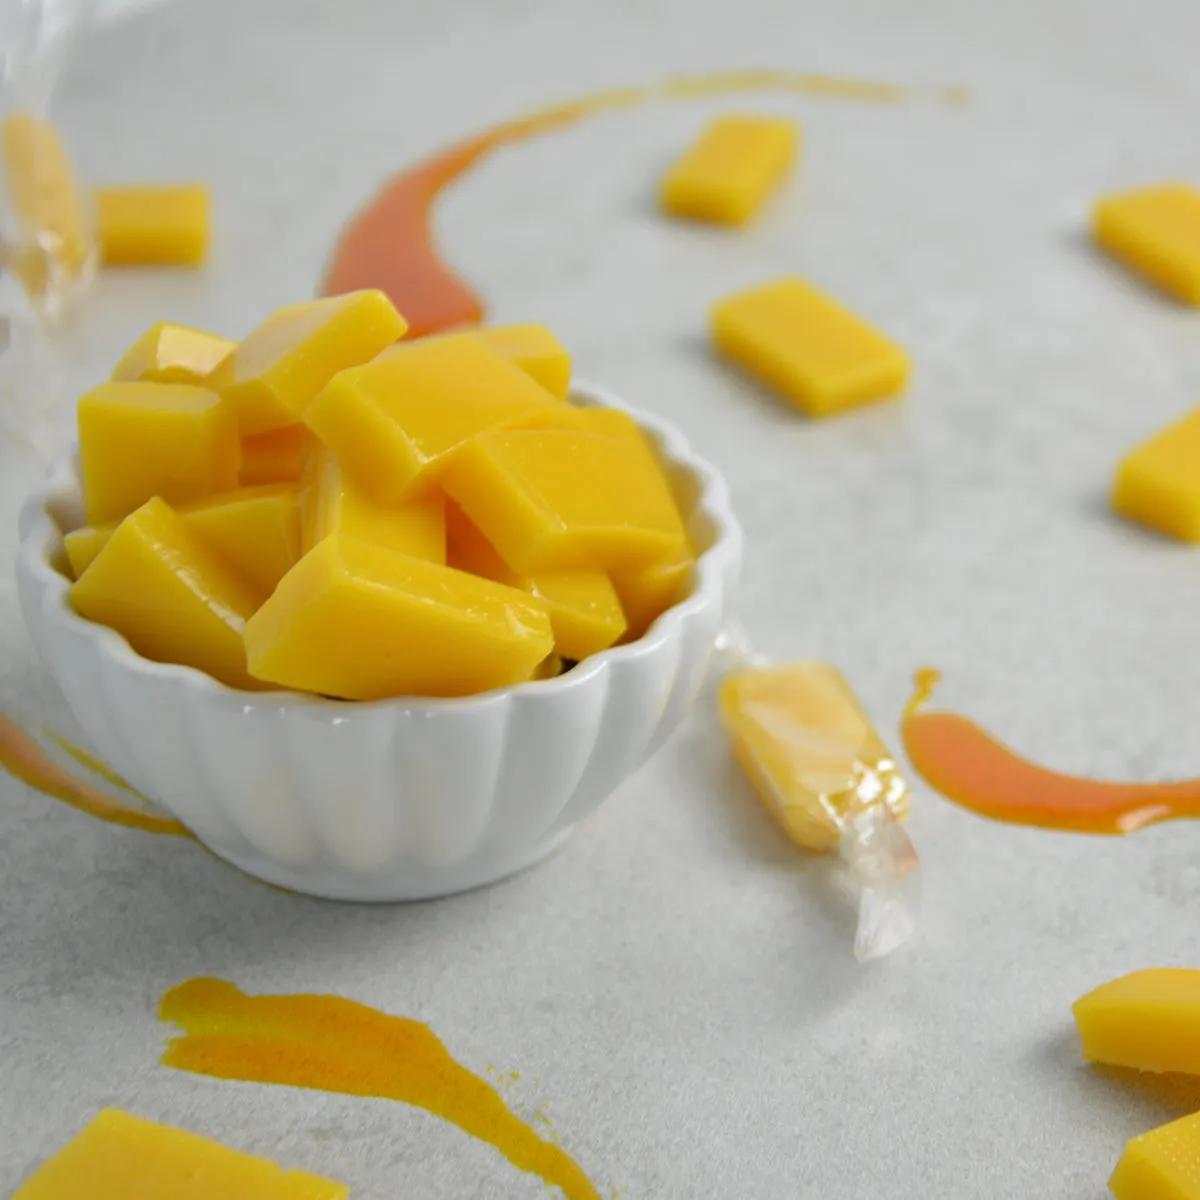 Mango Flavor Paste for all your Spring &amp; Summer Desserts - ifiGOURMET ...